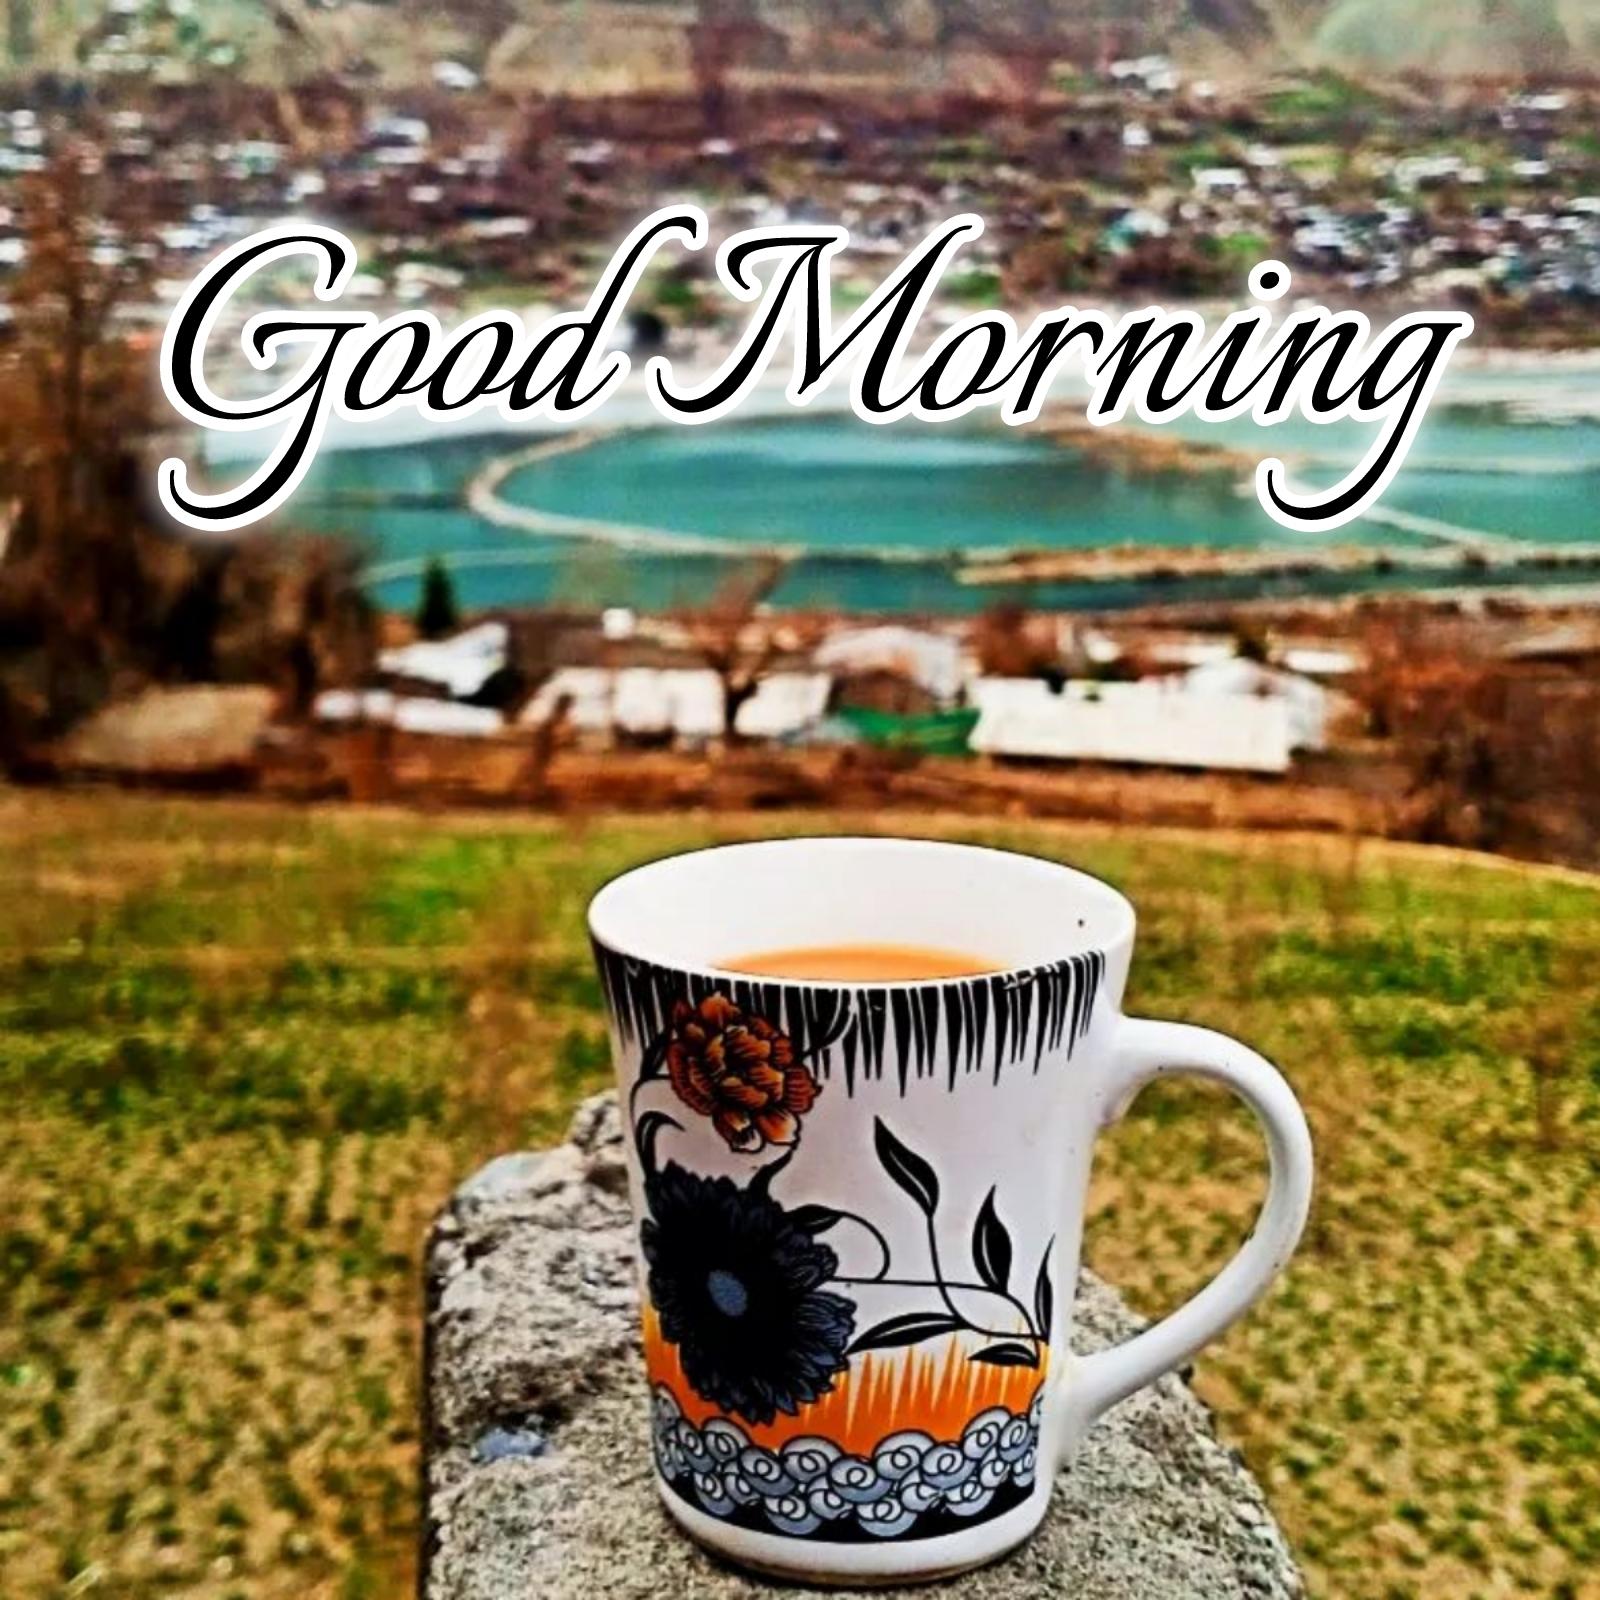 Good Morning Images Tea Cup